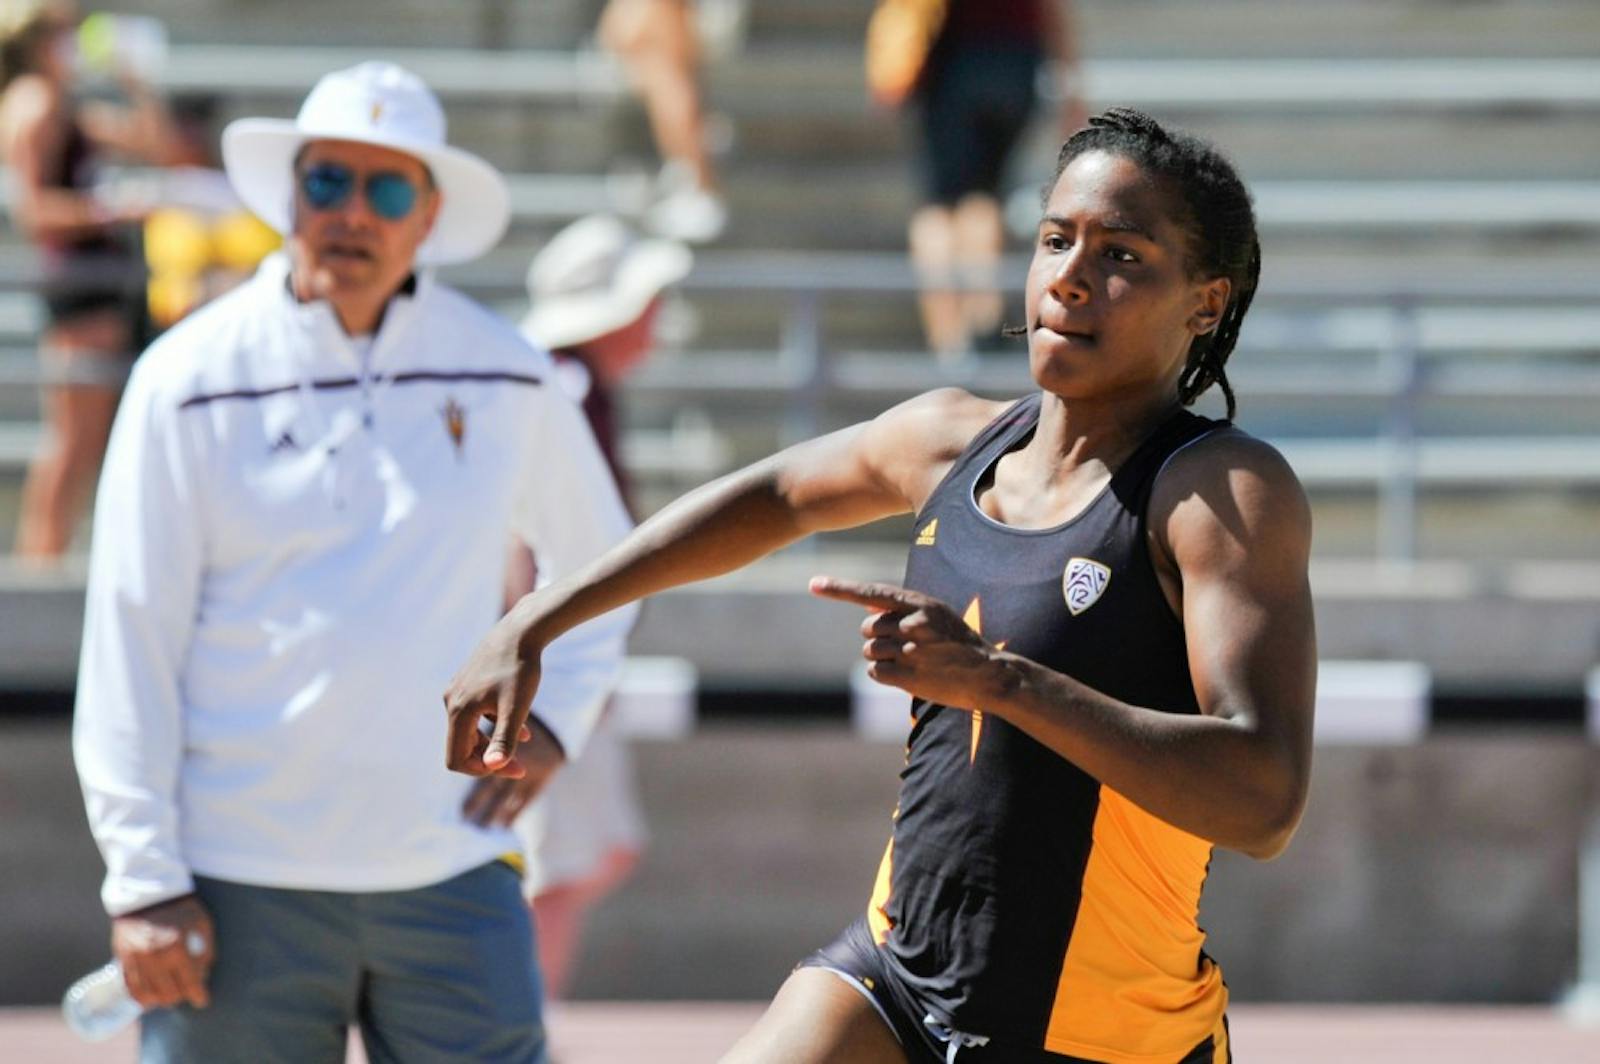 Track and field Sun Devils set personal bests at NAU TuneUp meet The